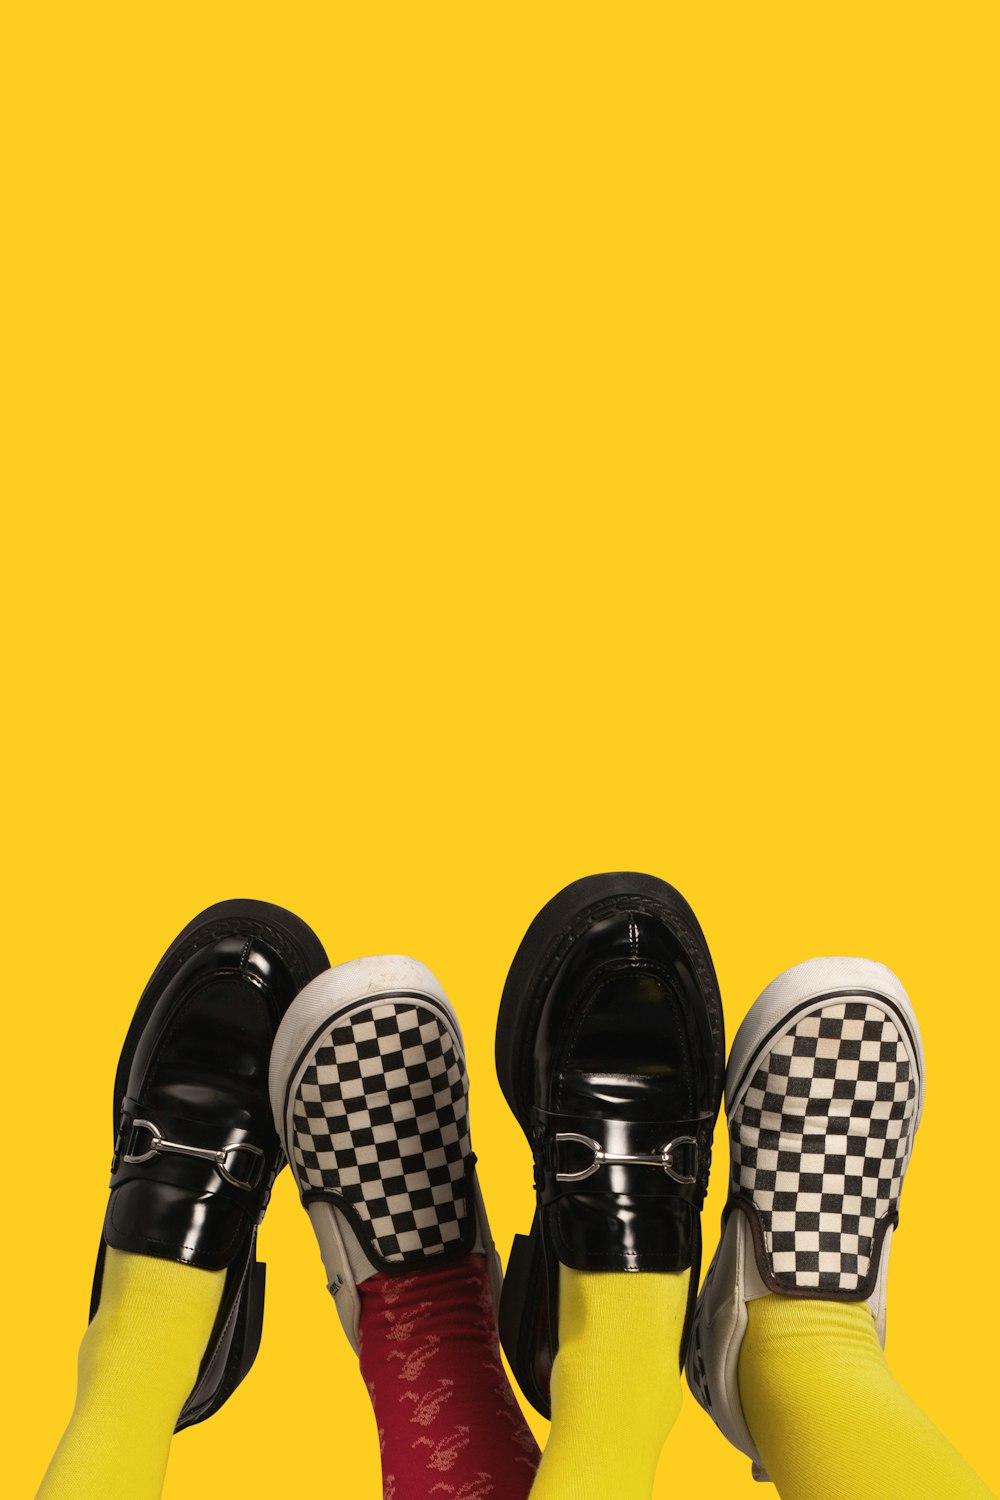 three pairs of black and white checkered shoes